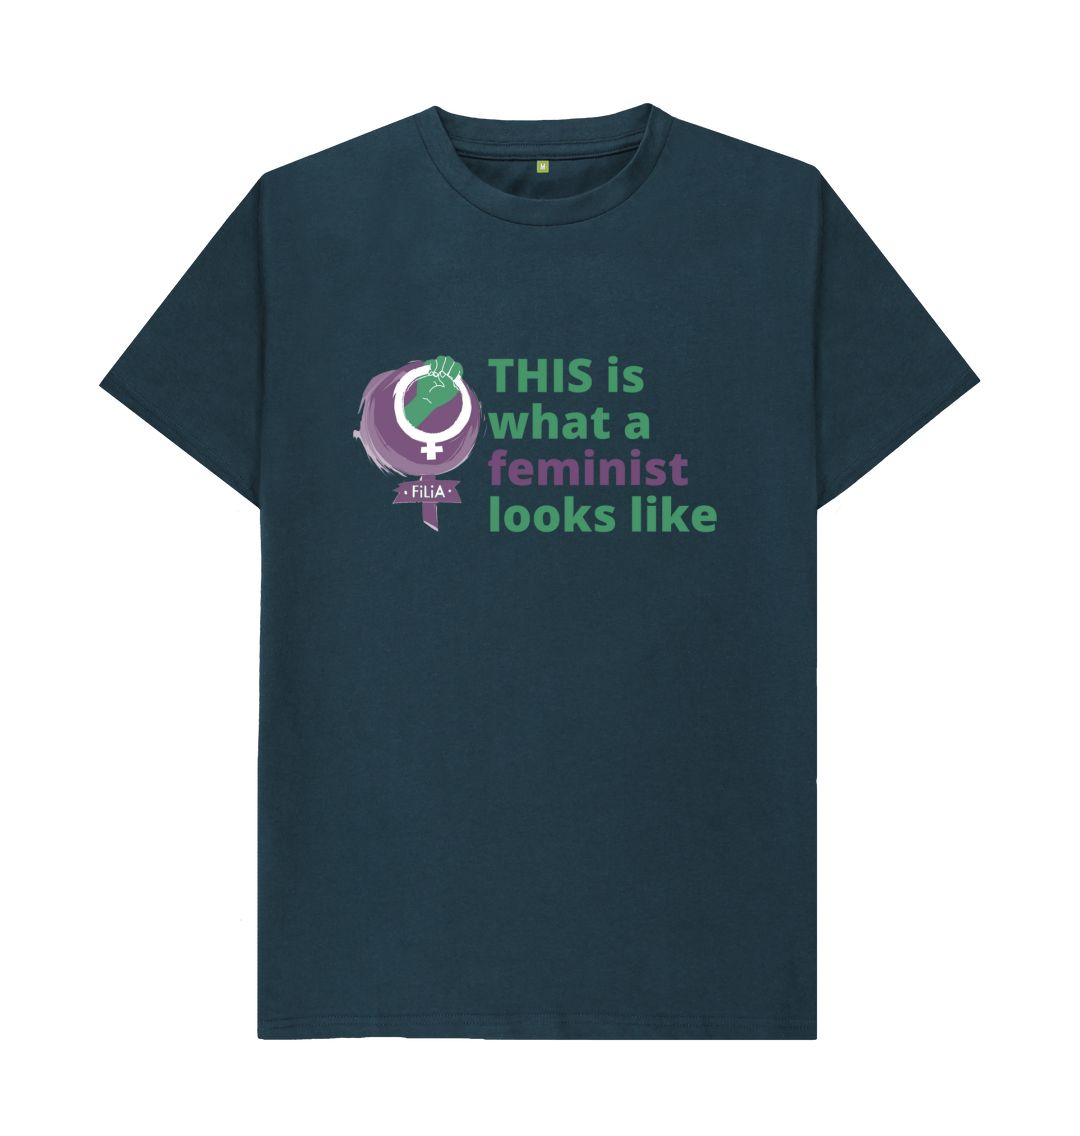 Denim Blue THIS is what a feminist looks like Men's Style T-Shirt